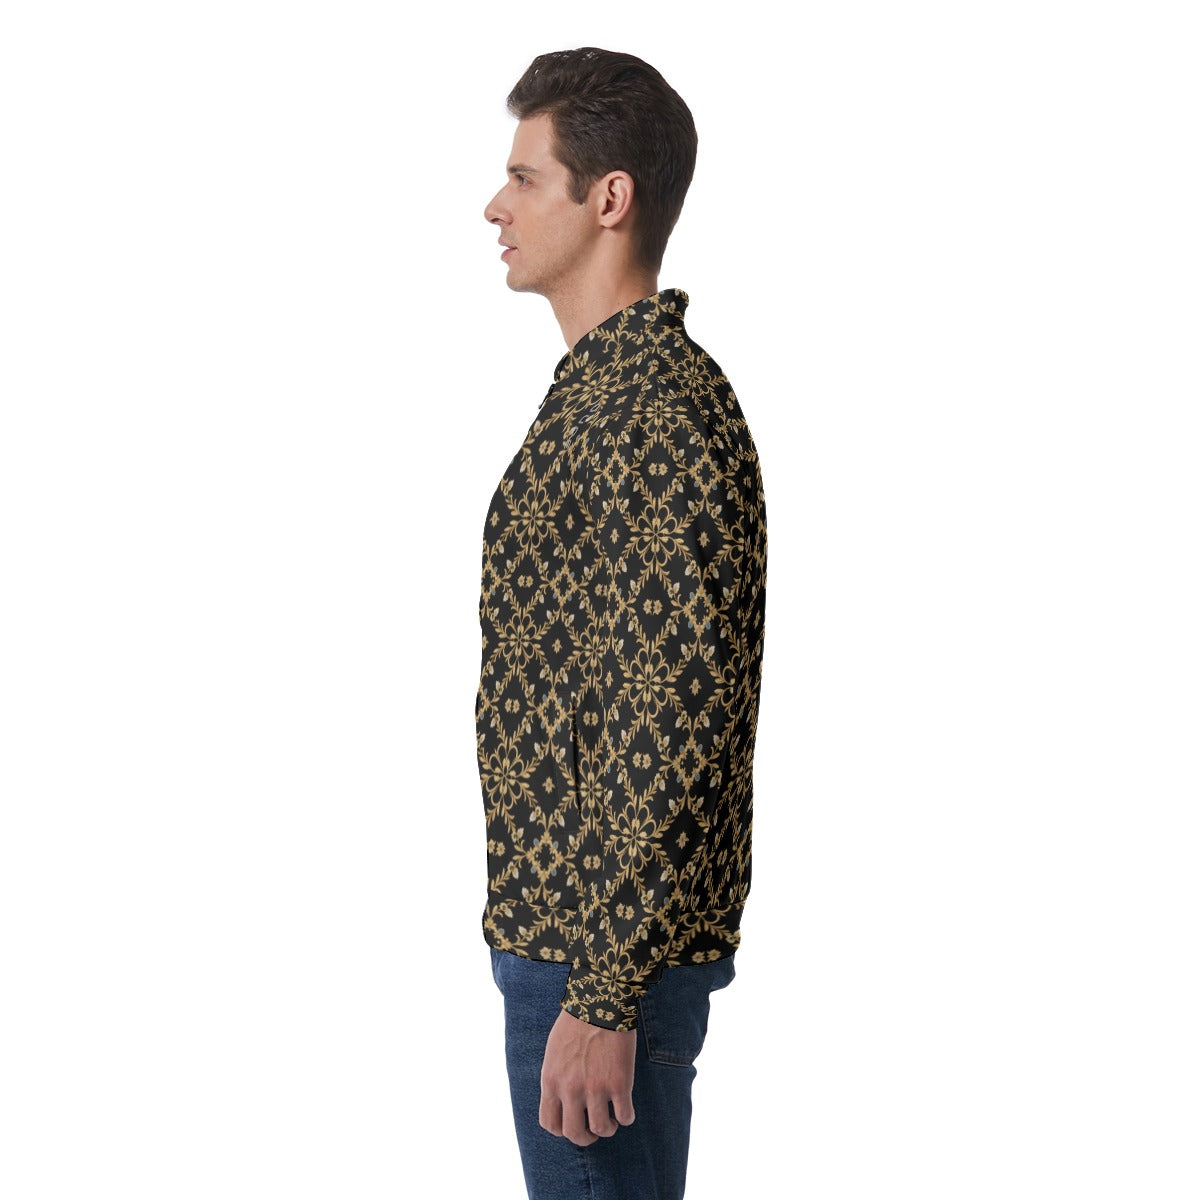 OUPE BAROQUE Men's DAY JACKET